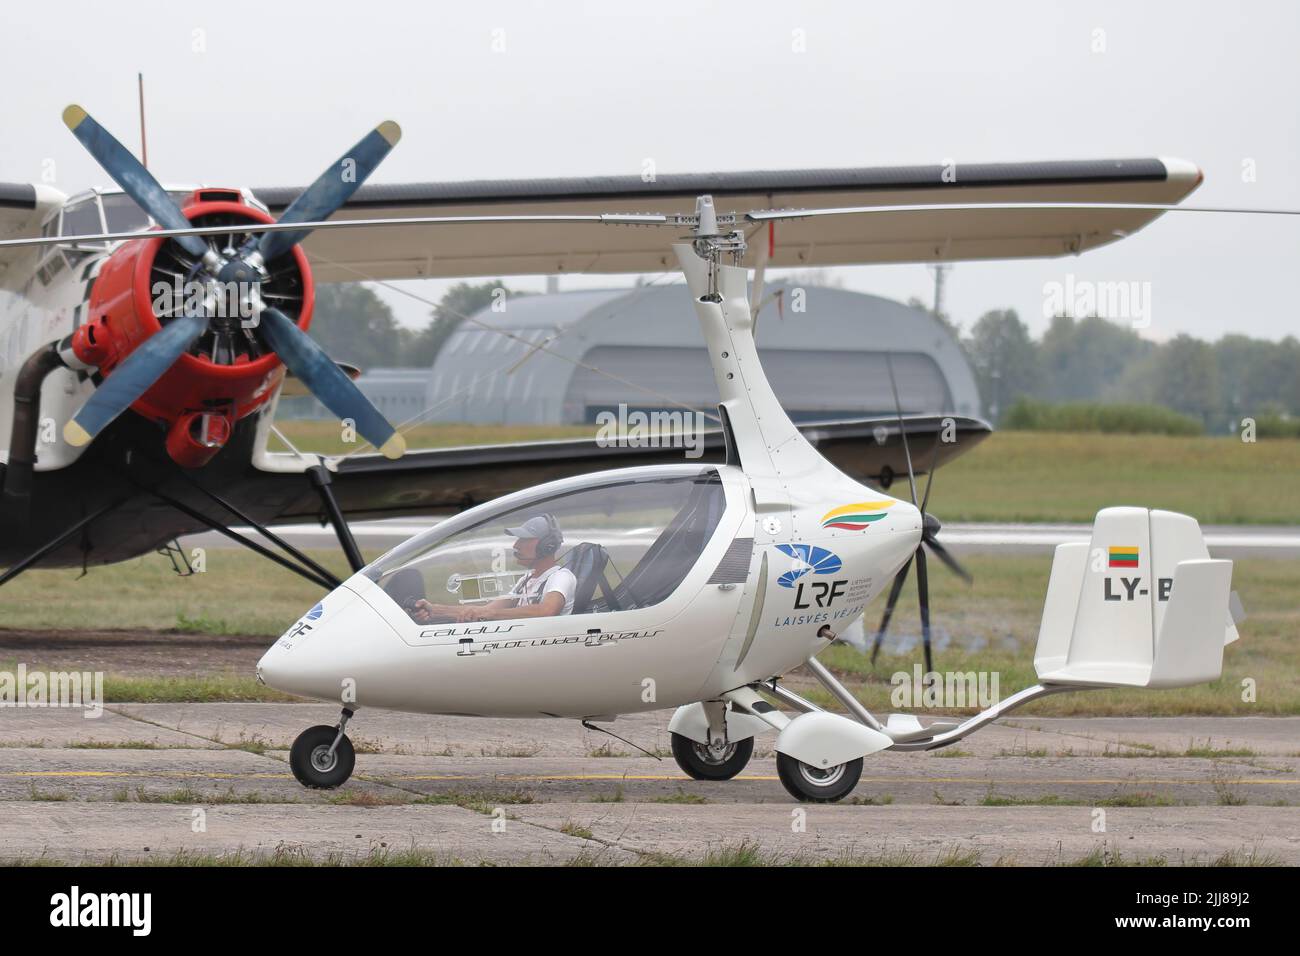 KAUNAS / LITHUANIA - August 10, 2019: Autogyro Calidus LY-BBA taxiing at 100 years Lithuanian aviation air show in Aleksotas airfield Stock Photo